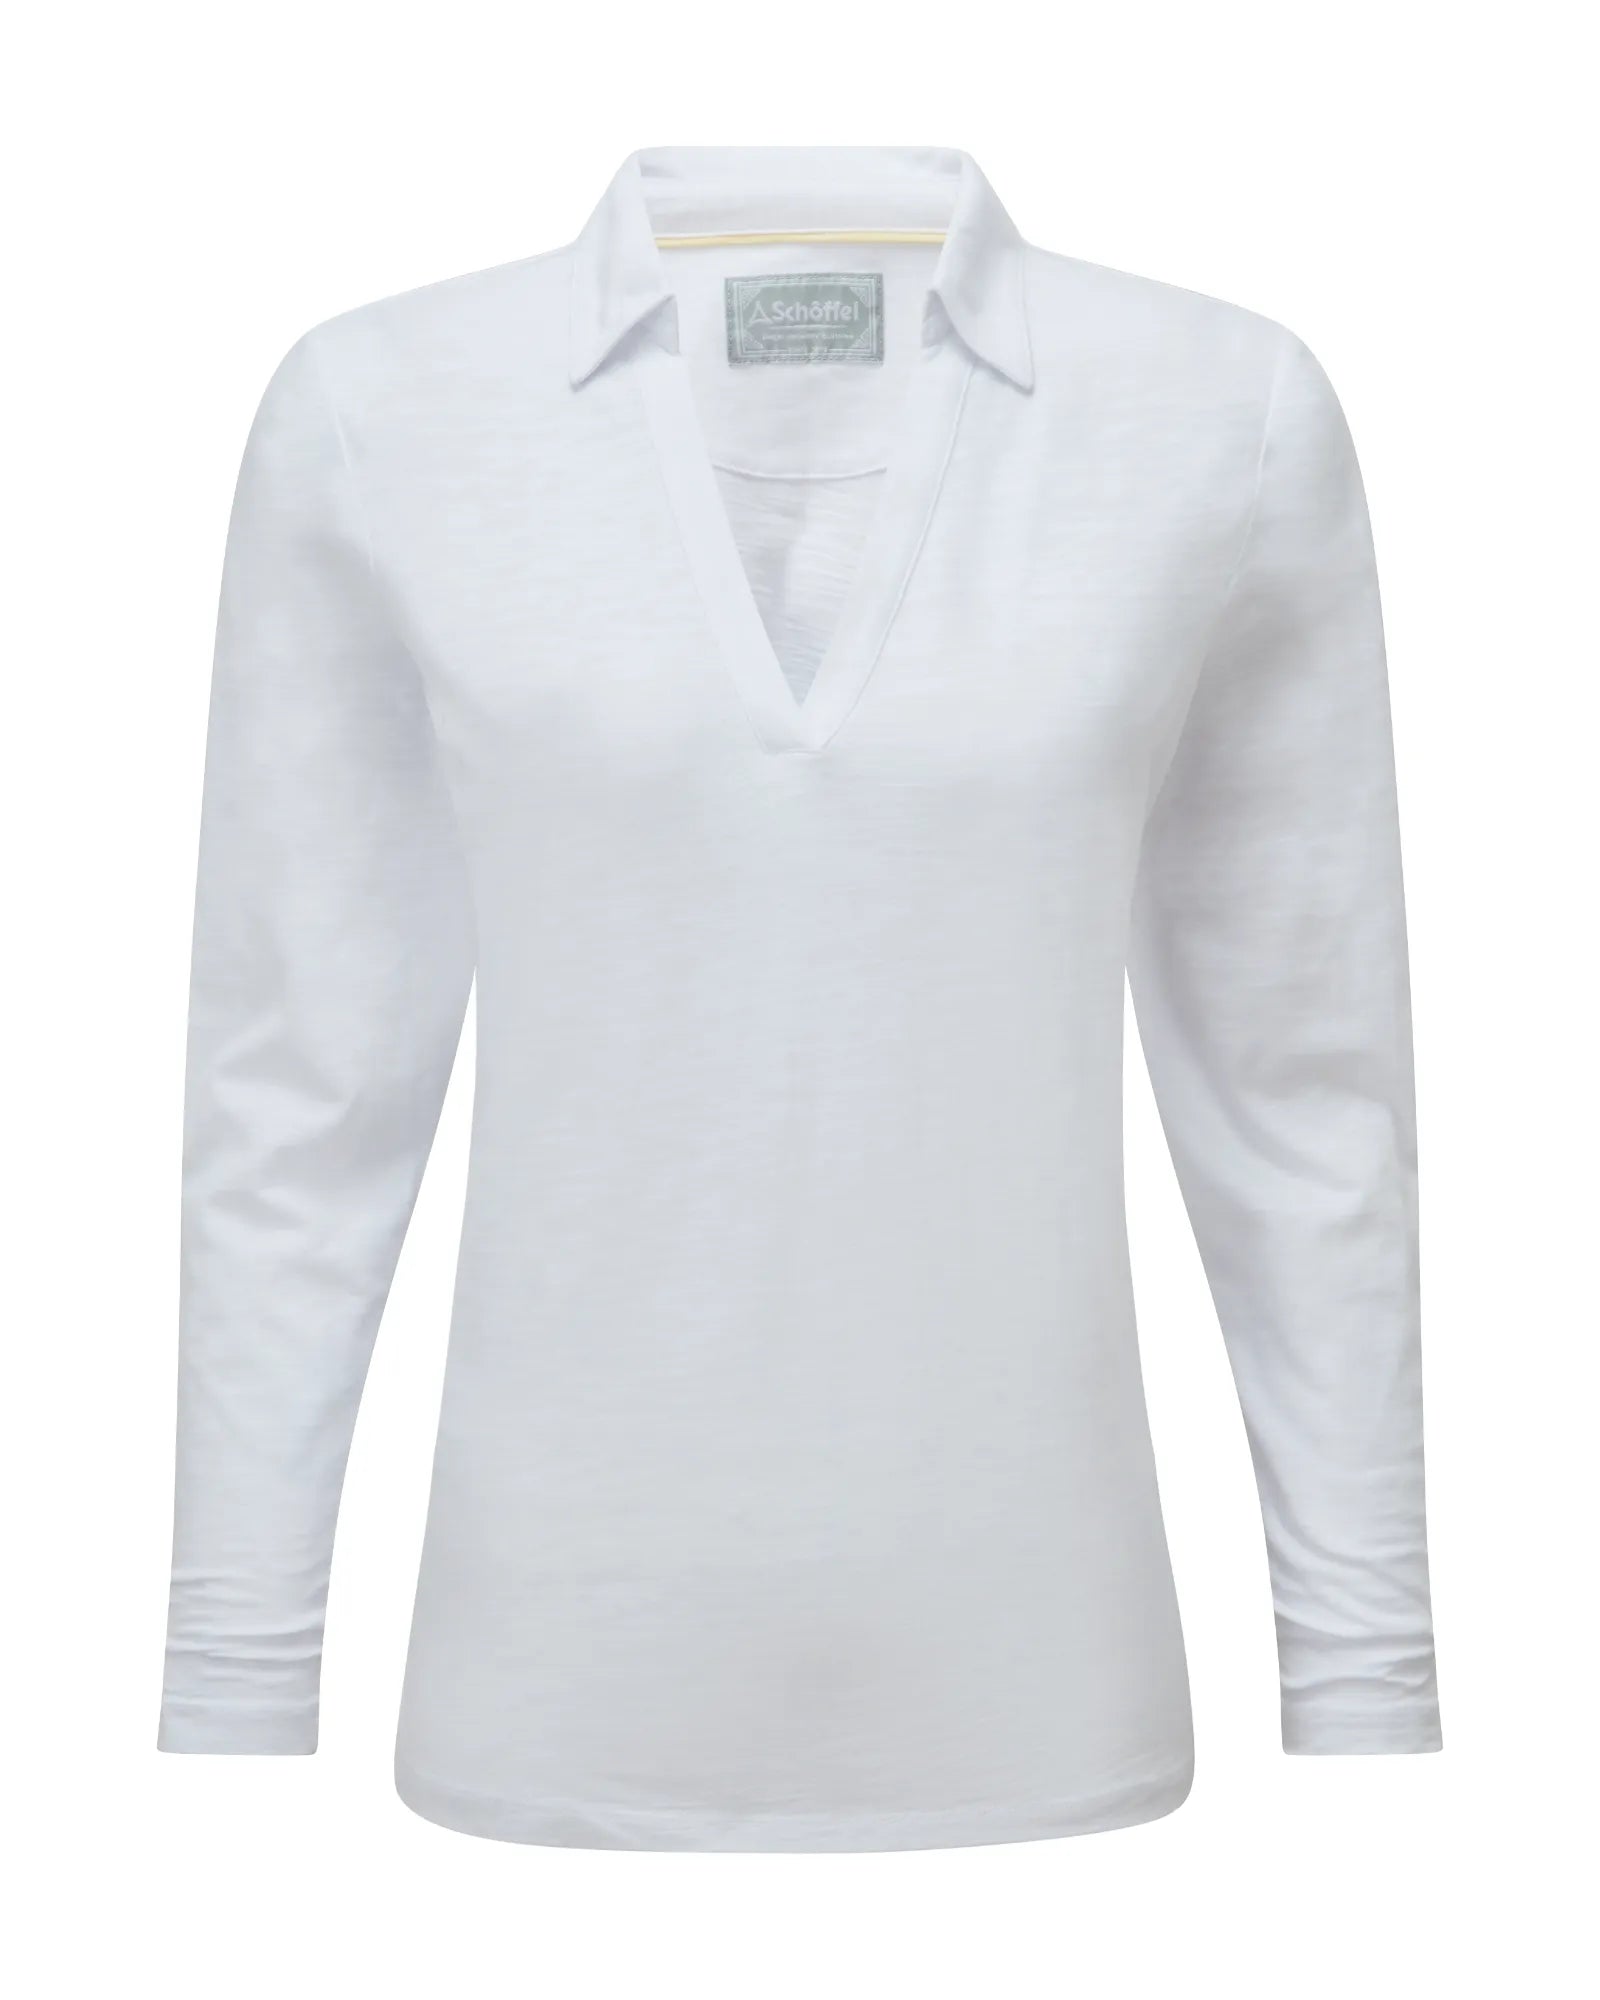 Pentle Bay Top - White